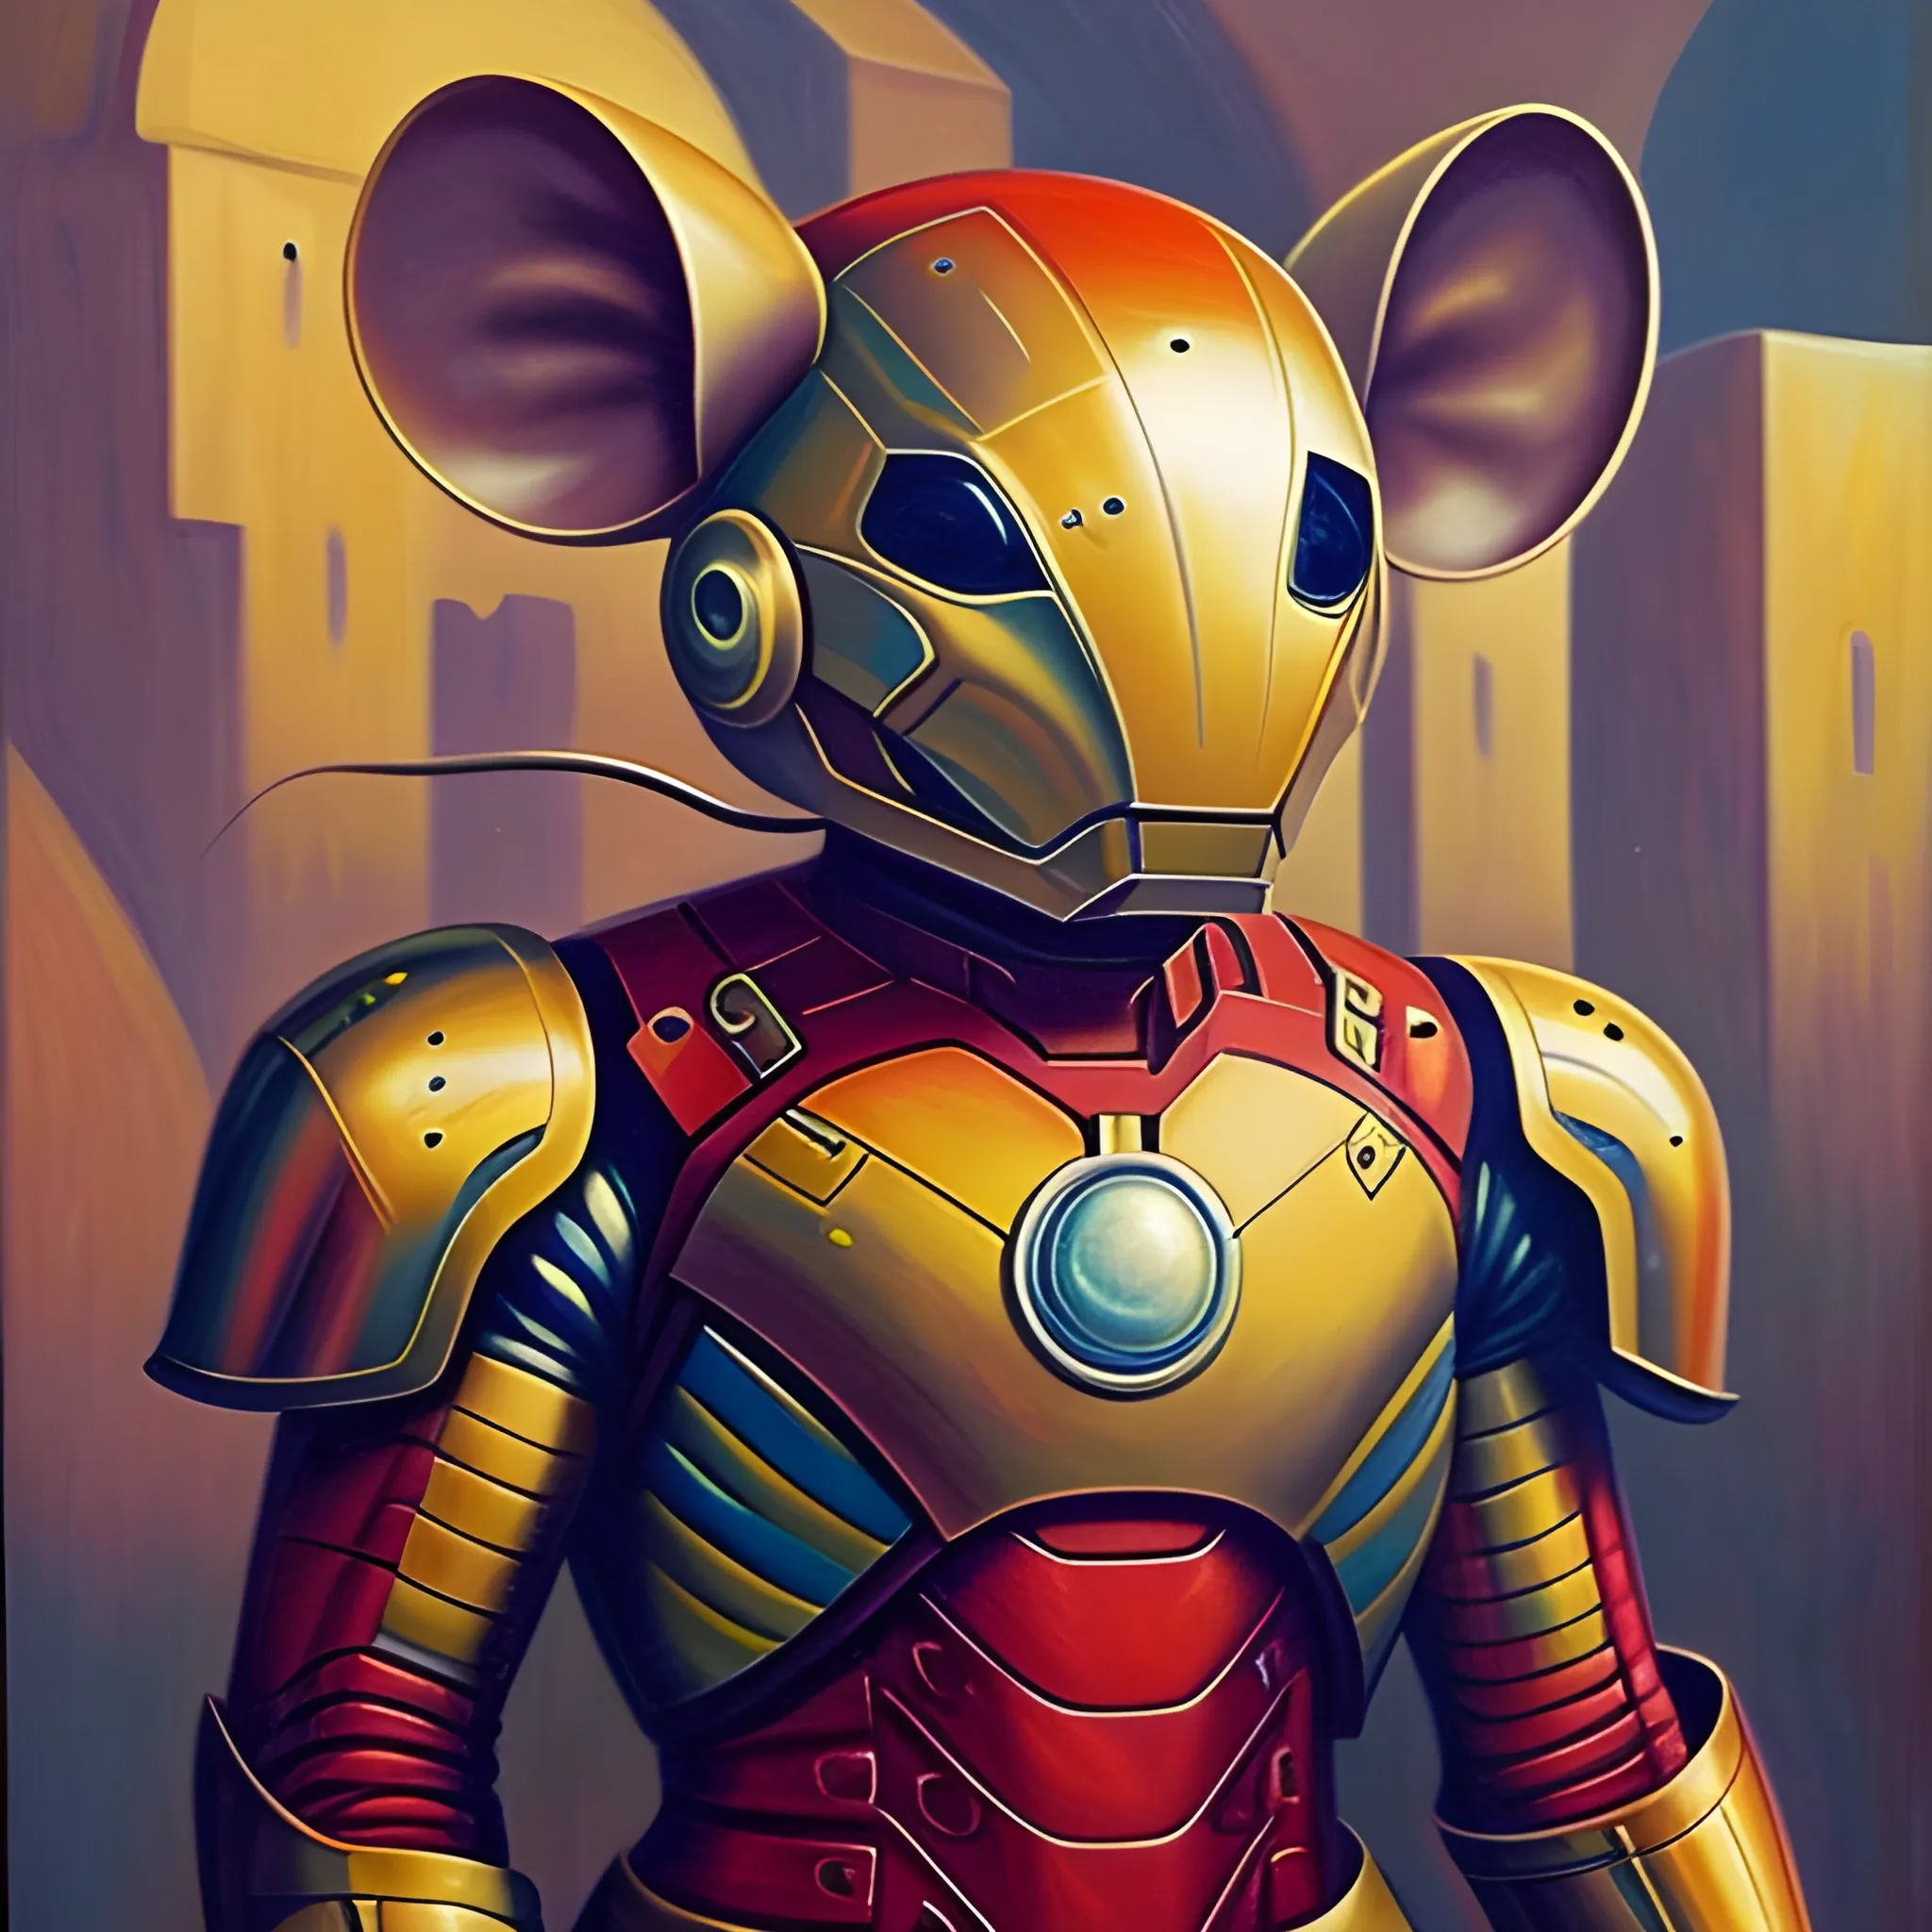 General Mouse is wearing armor. , Oil Painting, Trippy，Just like Iron Man